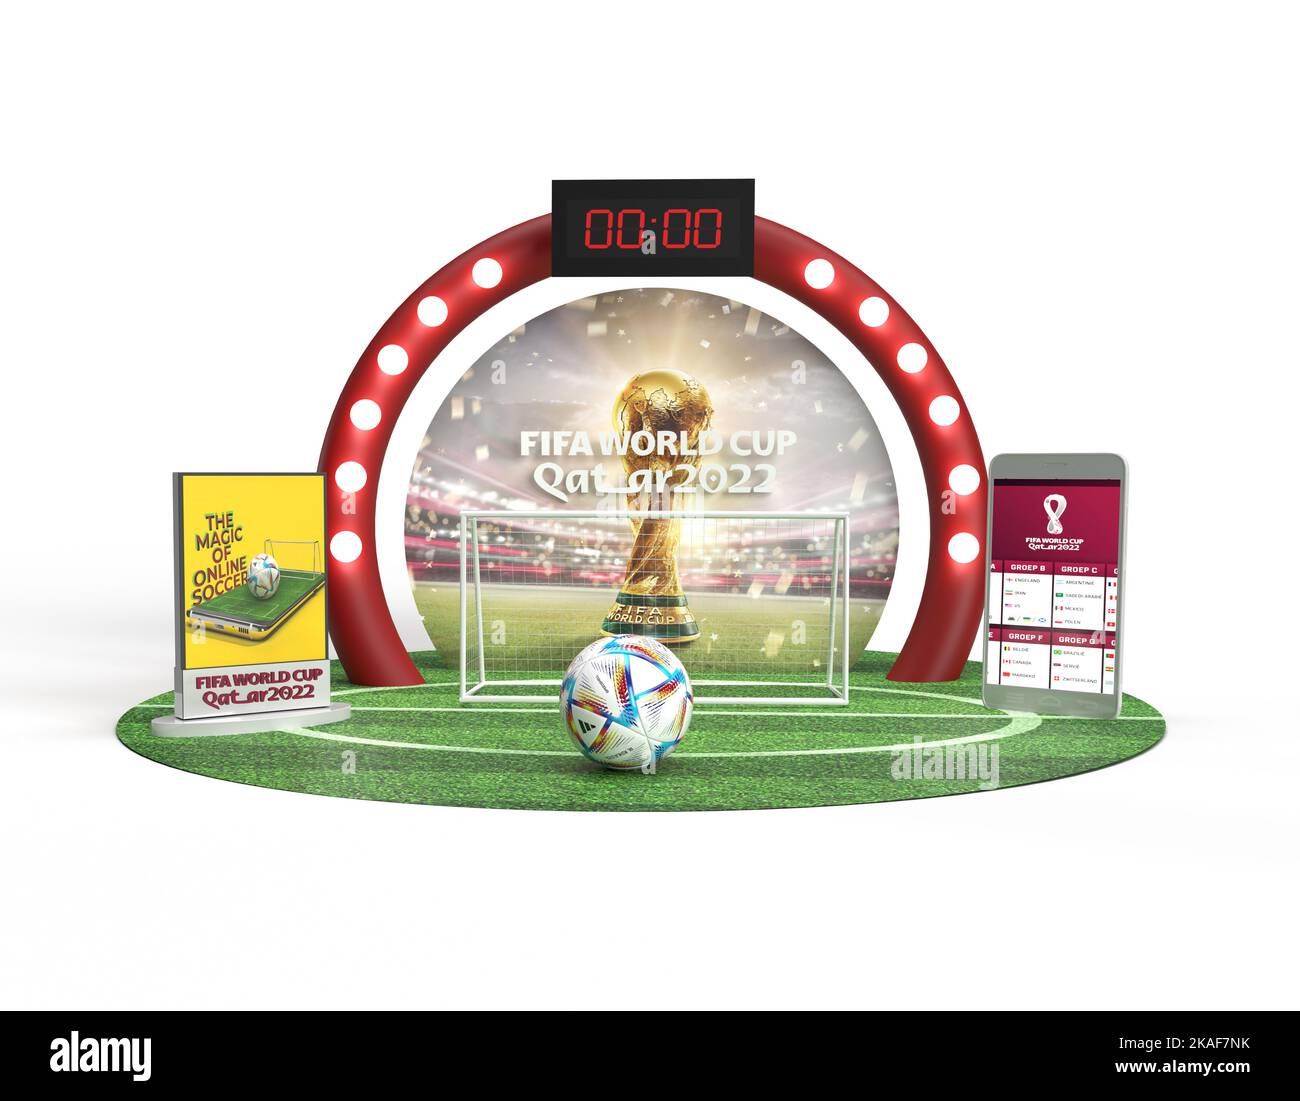 Fifa world cup 2022 qatar Cut Out Stock Images and Pictures